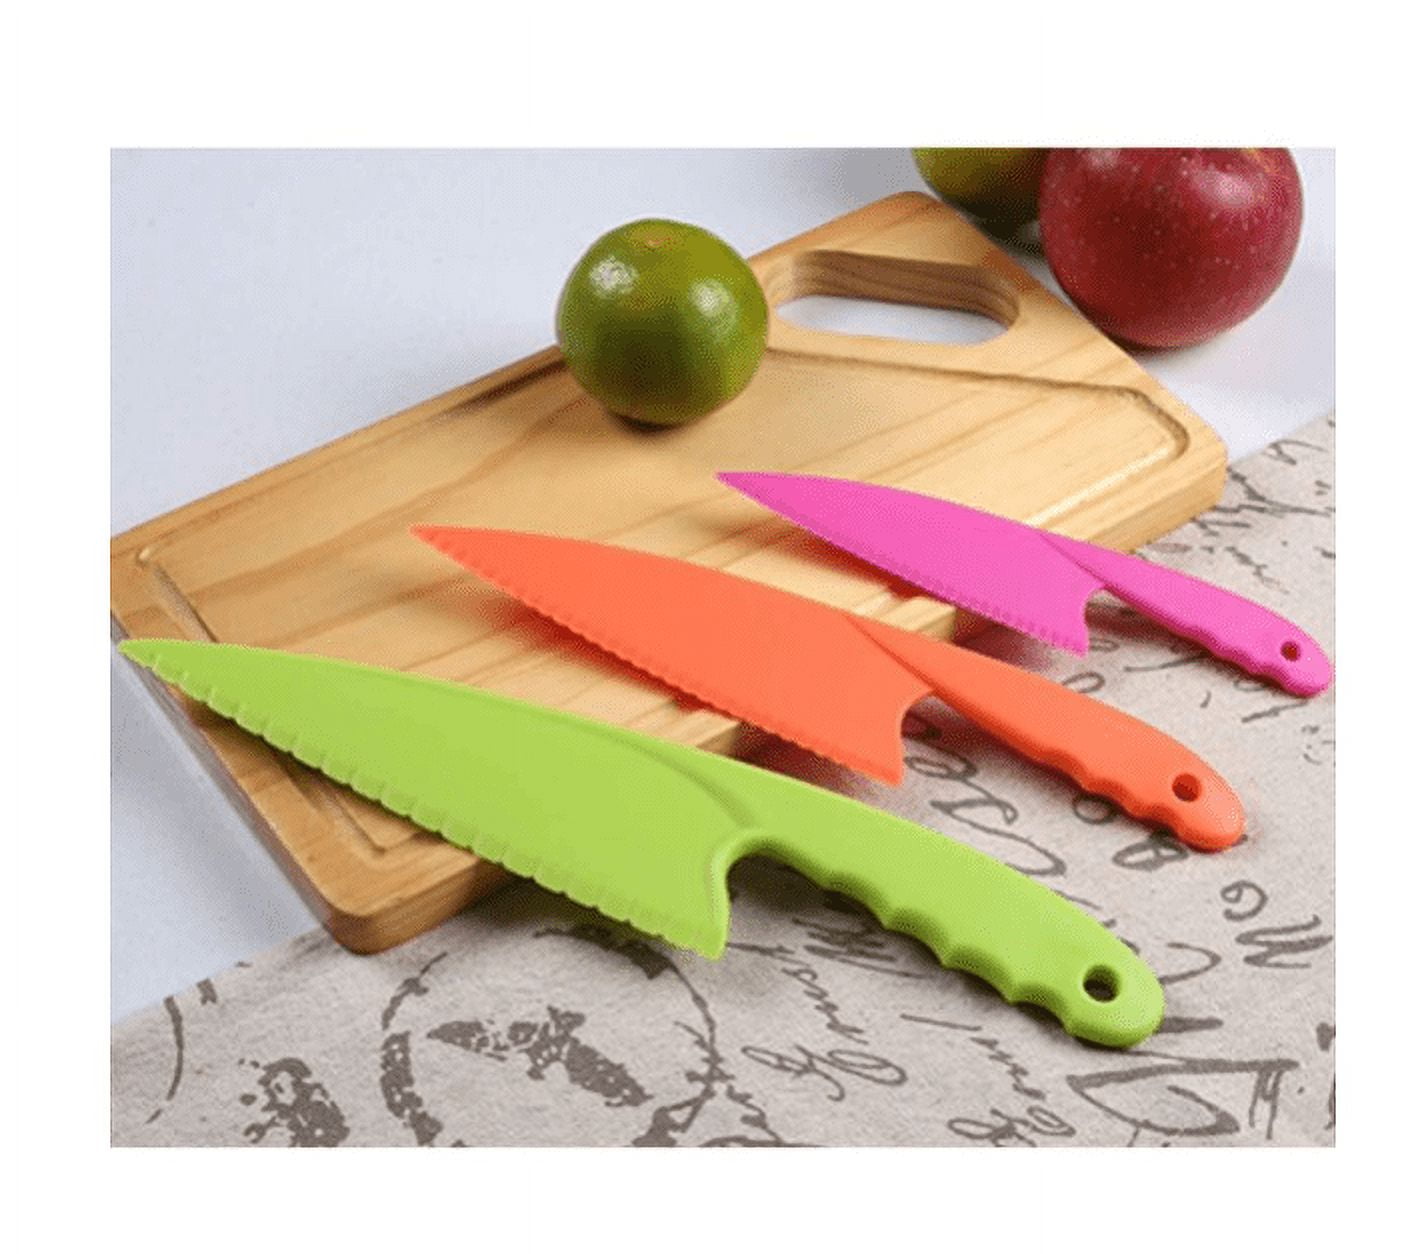  Professional Nylon Knife for Nonstick Pans, Kitchen Knife Safe  for Kids, Nonstick Knife Heat-resistant Best for Cutting Brownies, Cakes,  Bread, Lasagna, Cheese, Pizza, Pie etc.: Home & Kitchen